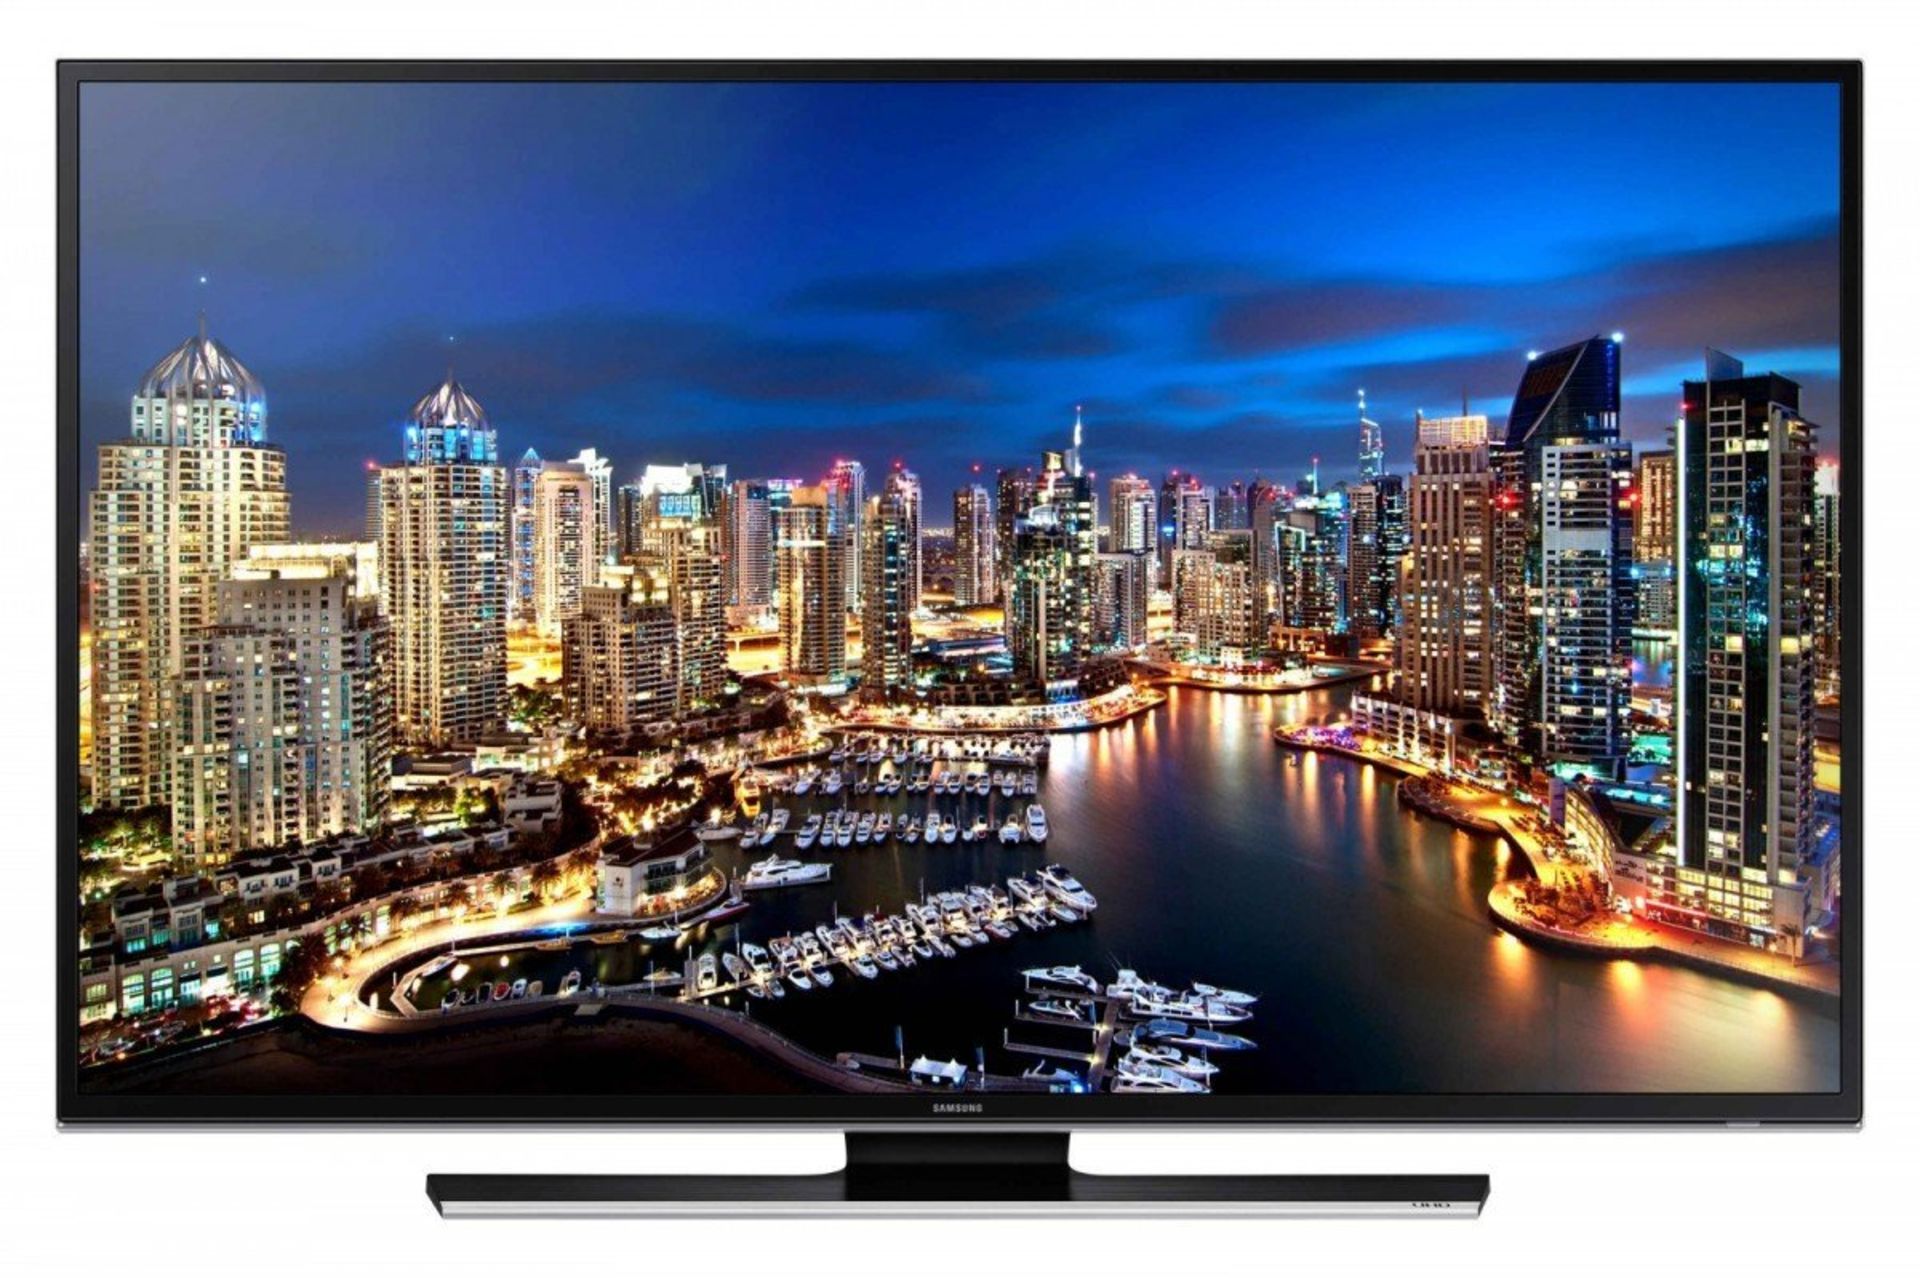 V Grade A Samsung 55" Commercial LED Display Full HD SMART TV With SMART View And Free Weather